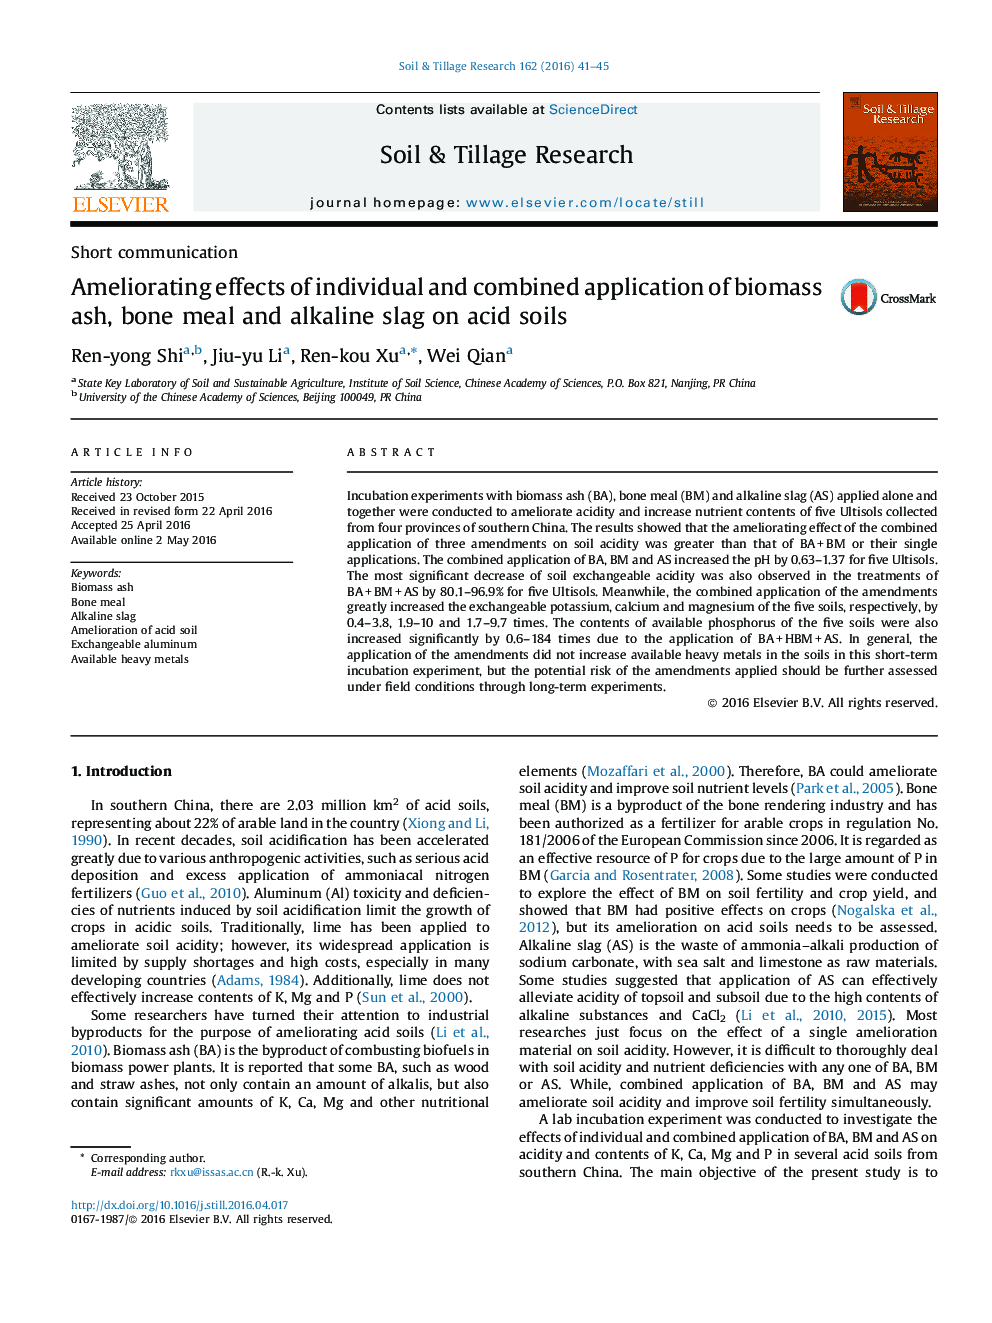 Ameliorating effects of individual and combined application of biomass ash, bone meal and alkaline slag on acid soils